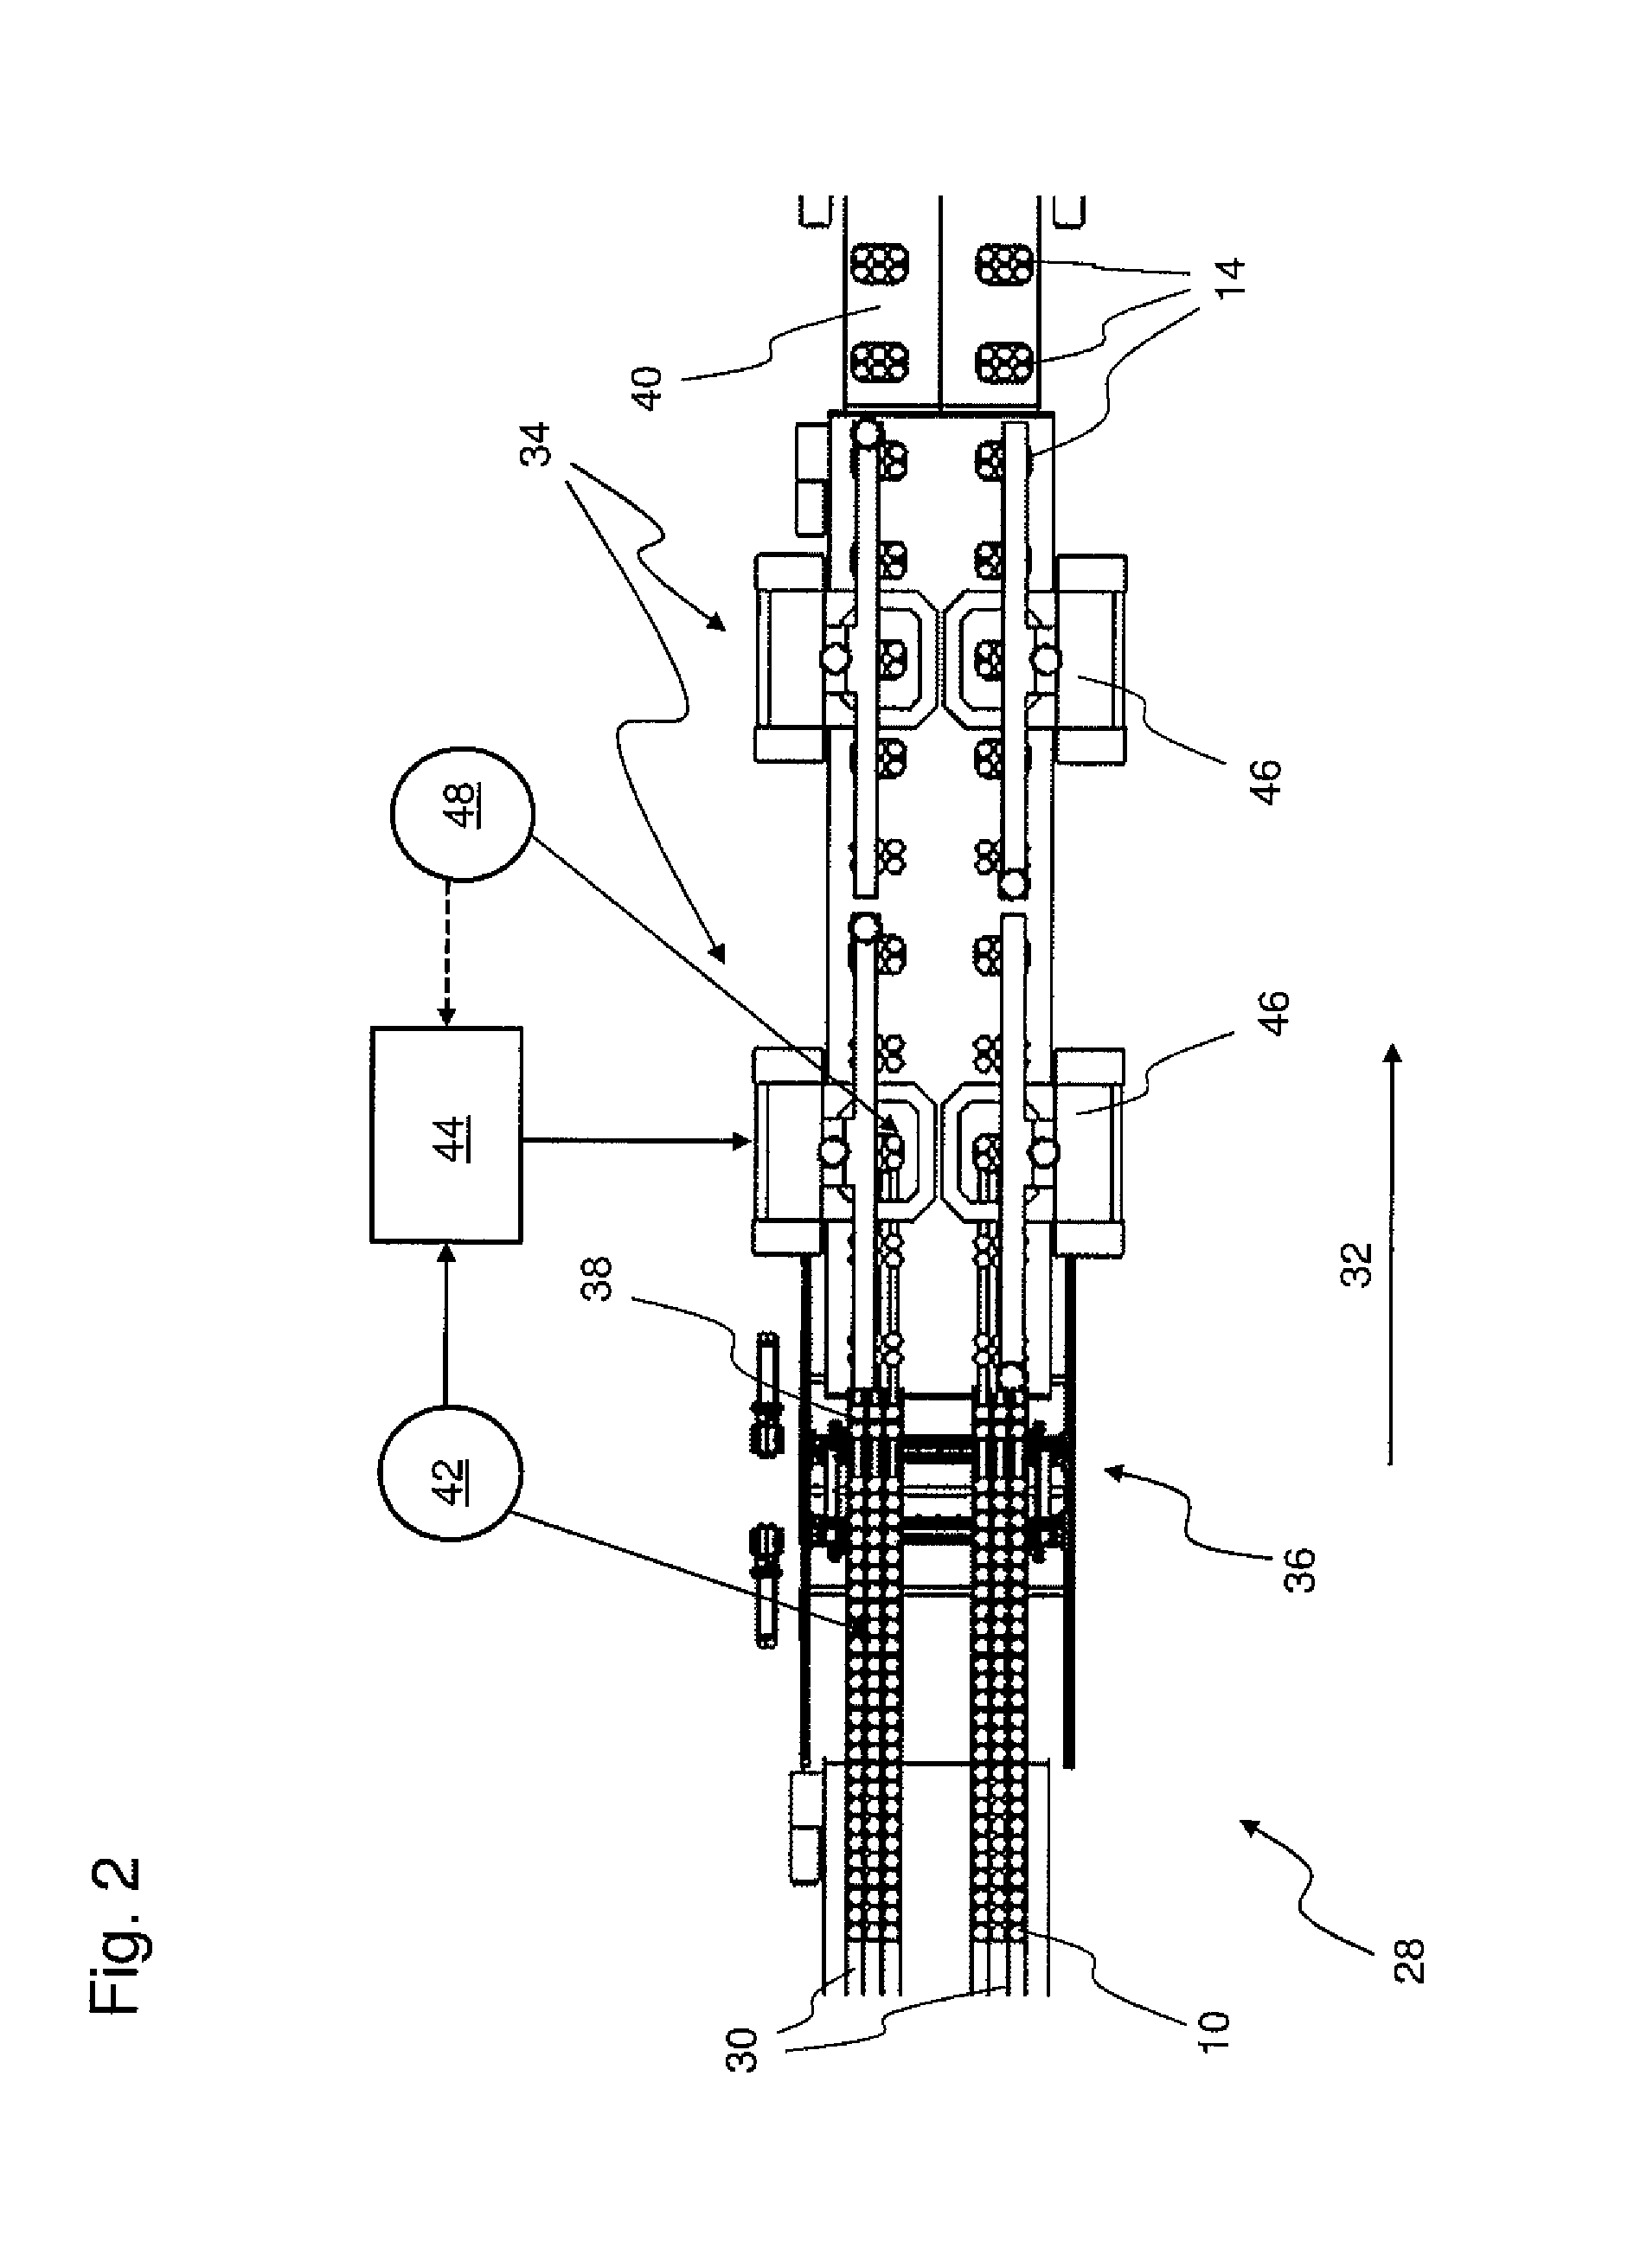 Device and method for manufacturing strapped packs and regulatory and/or control method for a strapping device